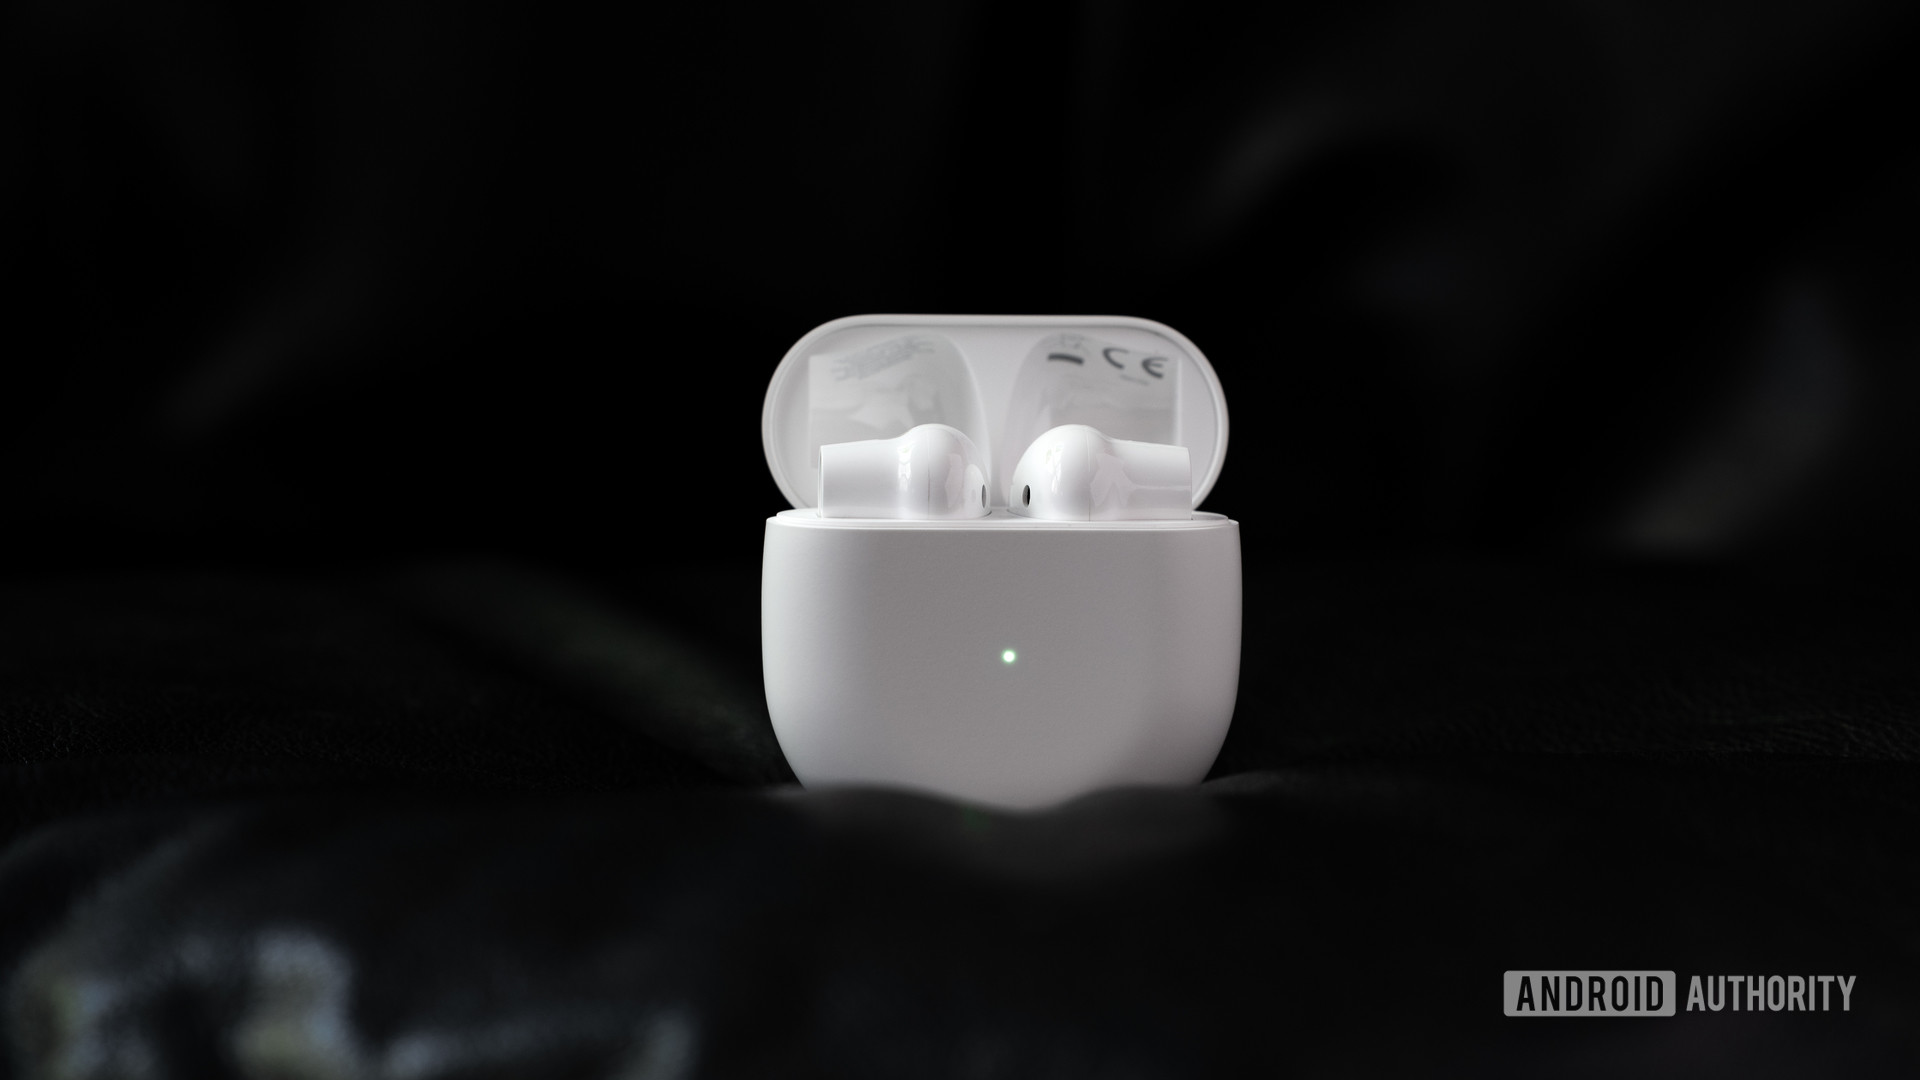 A picture of the OnePlus Buds true wireless earbuds (white) in the open charging case, which is standing erect against a black background.